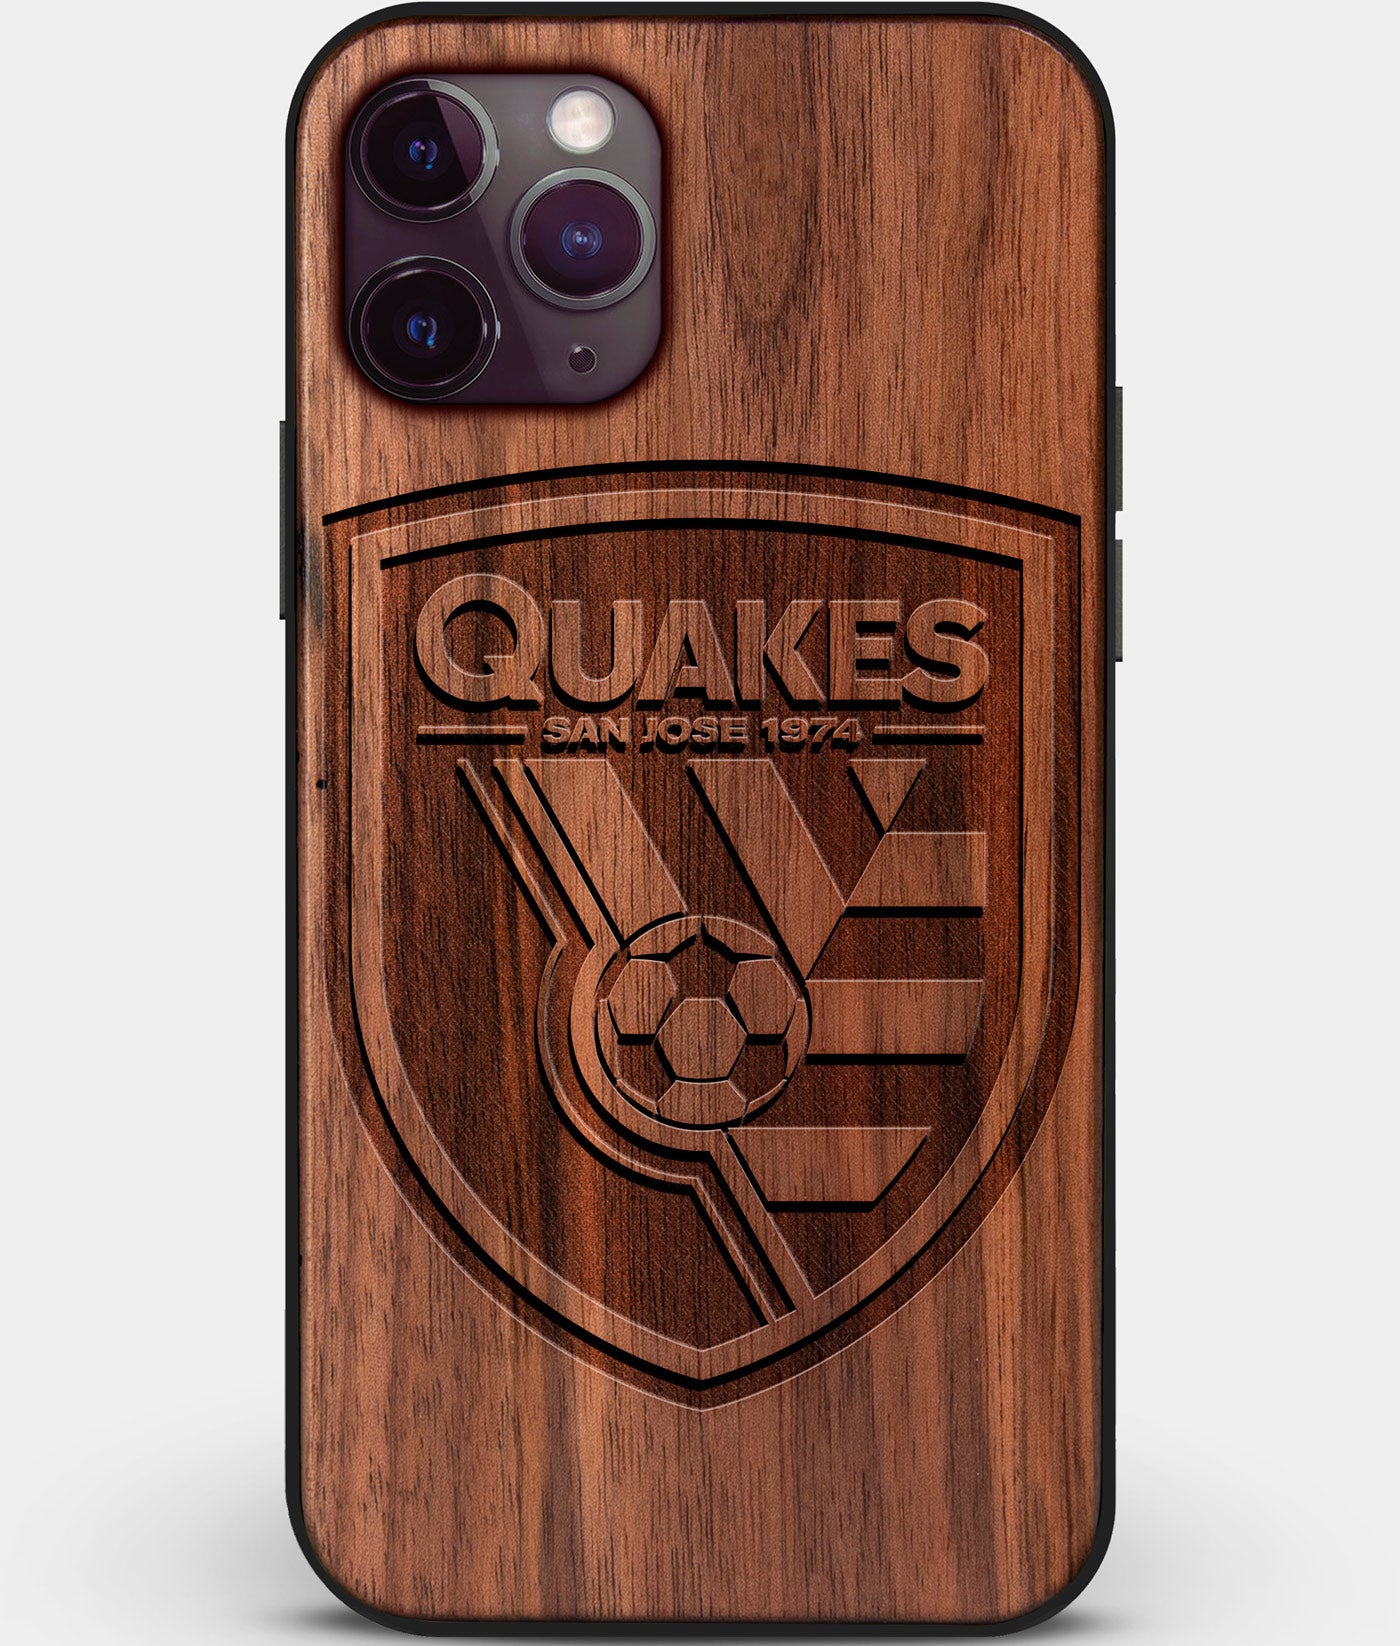 Custom Carved Wood San Jose Earthquakes iPhone 11 Pro Max Case | Personalized Walnut Wood San Jose Earthquakes Cover, Birthday Gift, Gifts For Him, Monogrammed Gift For Fan | by Engraved In Nature